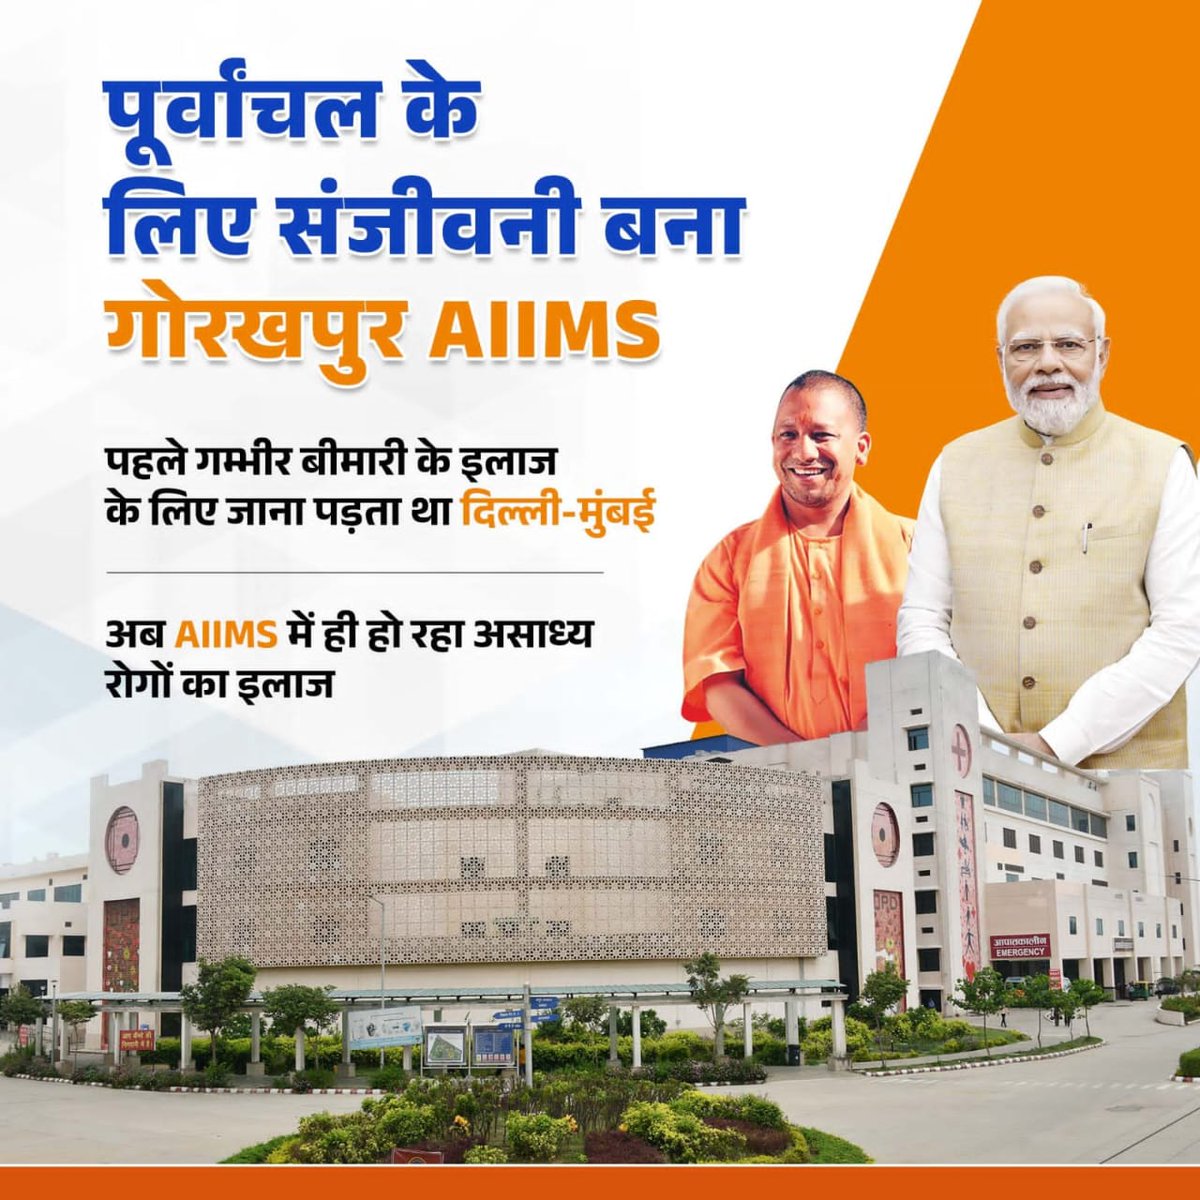 The construction of AIIMS for Purvanchal has proved to be very good and wonderful for the people of Purvanchal.
#AyushmannBhavUP